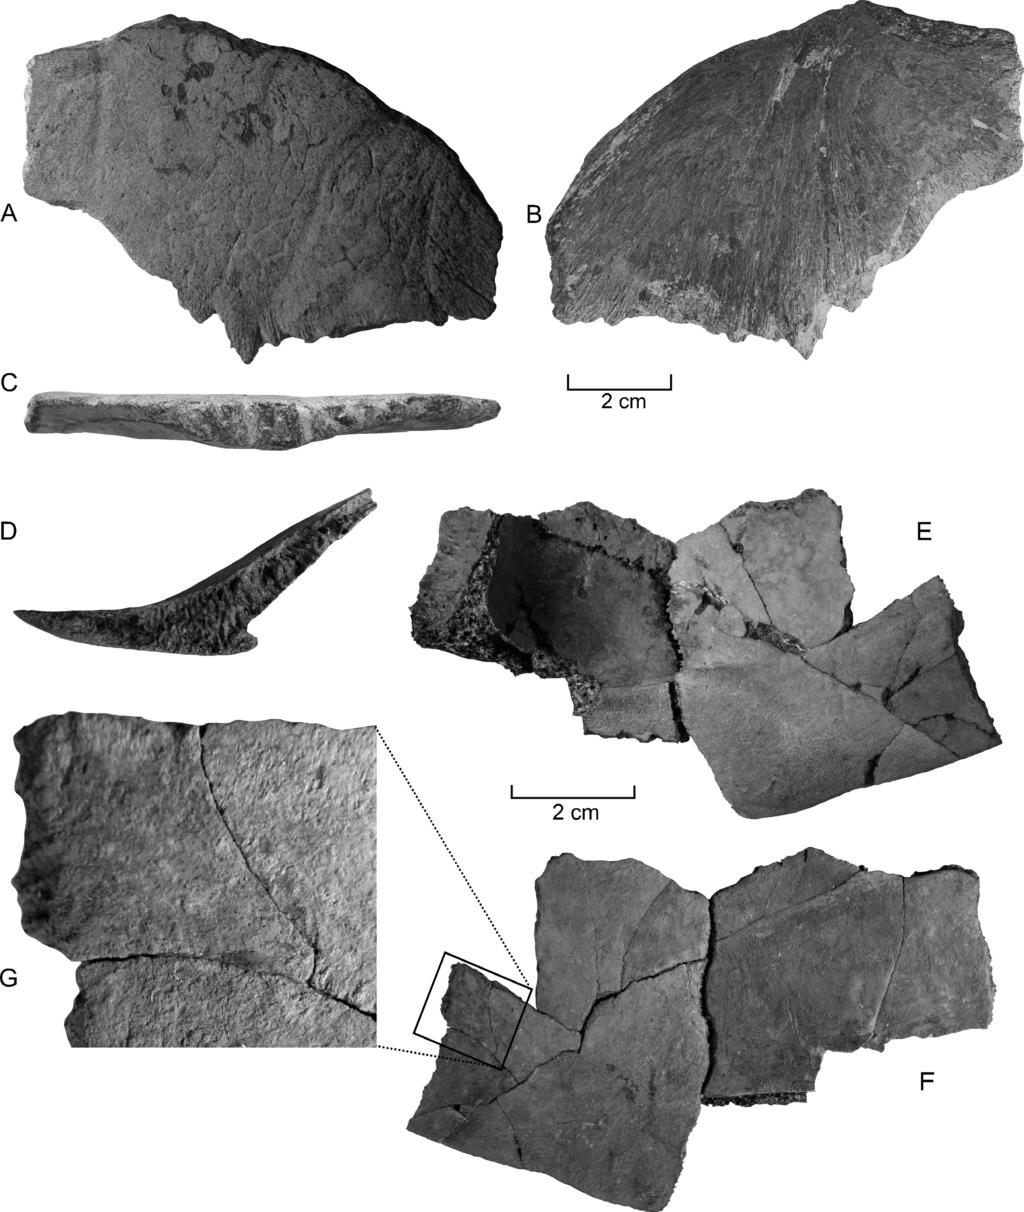 4 PALEOBIOS, VOL. 31, NUMBER 1, MAY 2014 Figure 3. A C. Bothremydidae indet., left epiplastron from bed A of the Woodstock Member of the Nanjemoy Formation of Maryland, CMM-V-4776. A. Ventral (external) view.